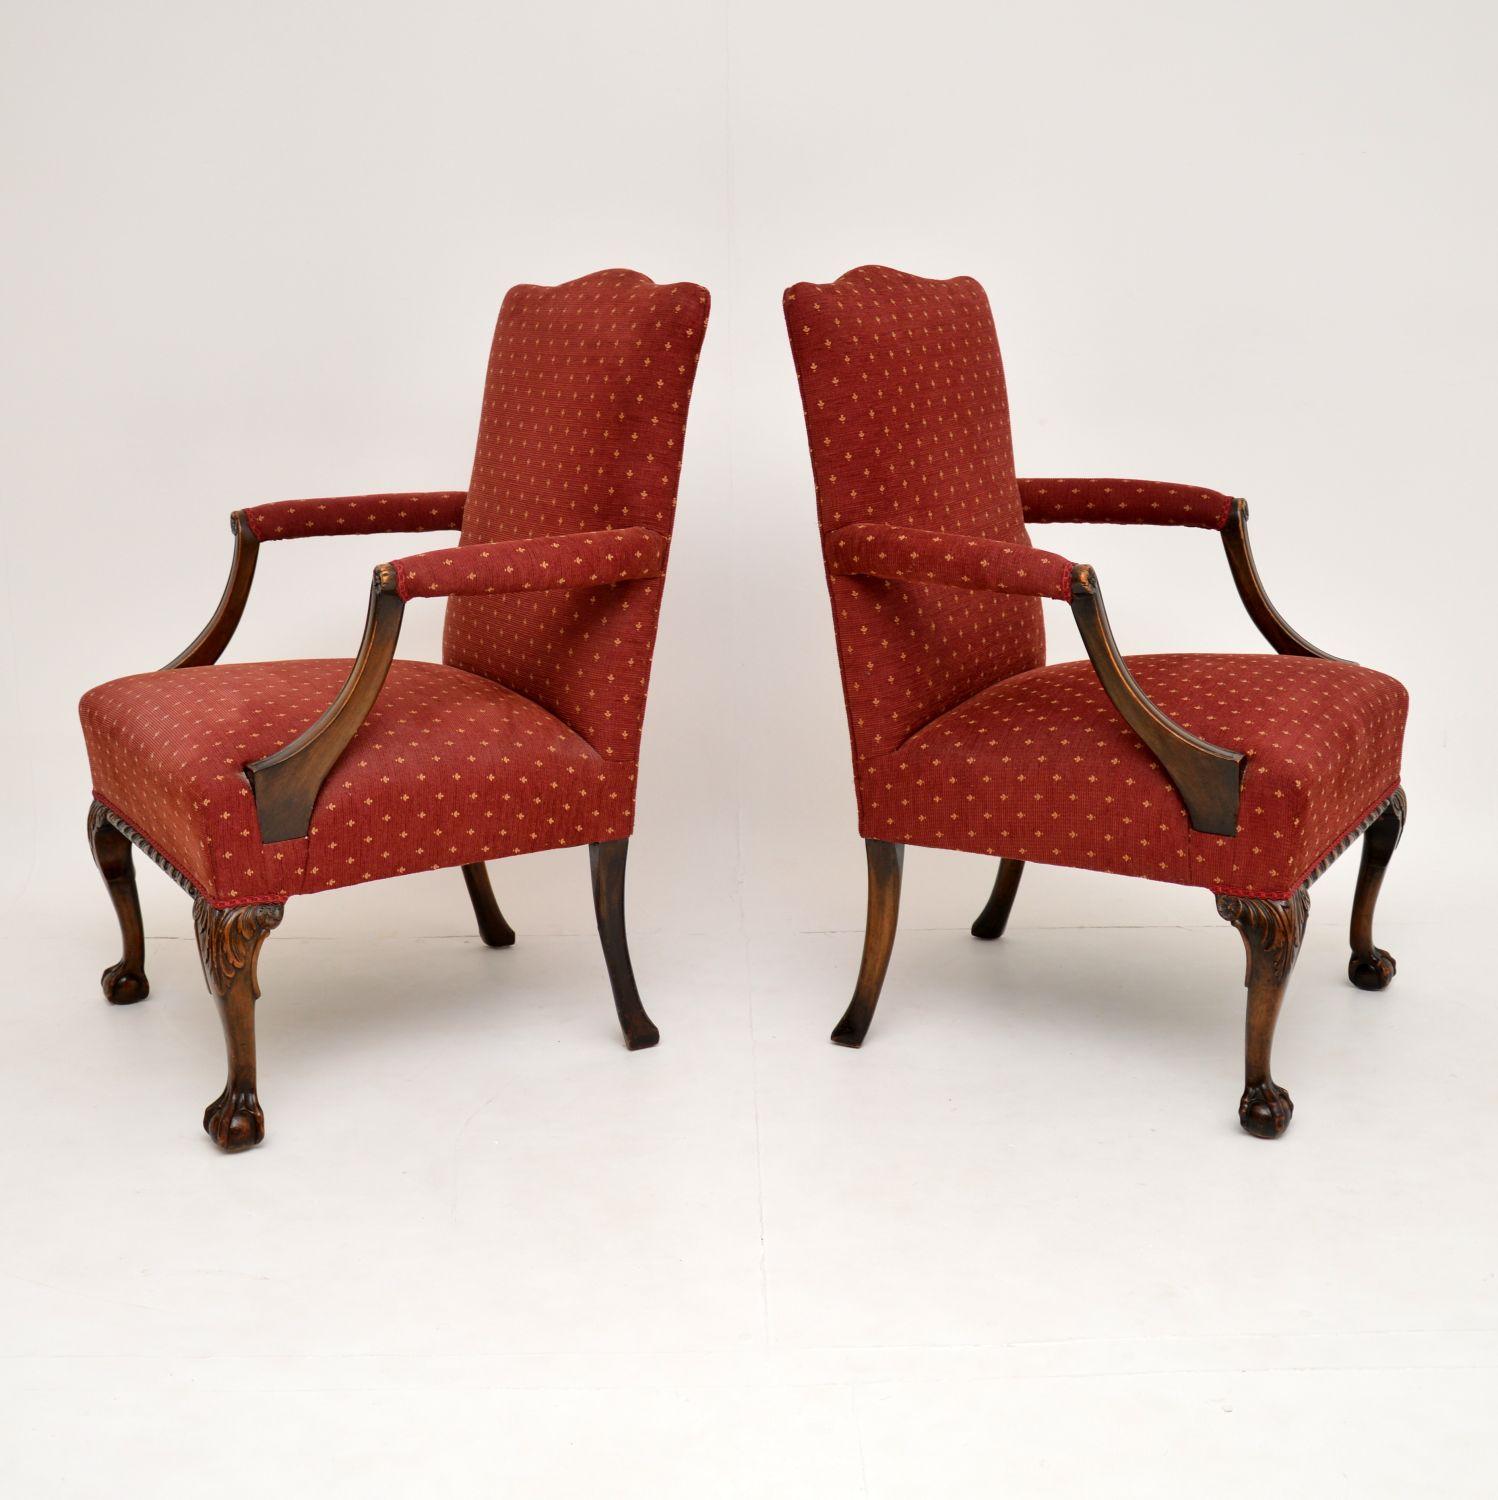 English Pair of Antique Mahogany Chippendale Style Armchairs